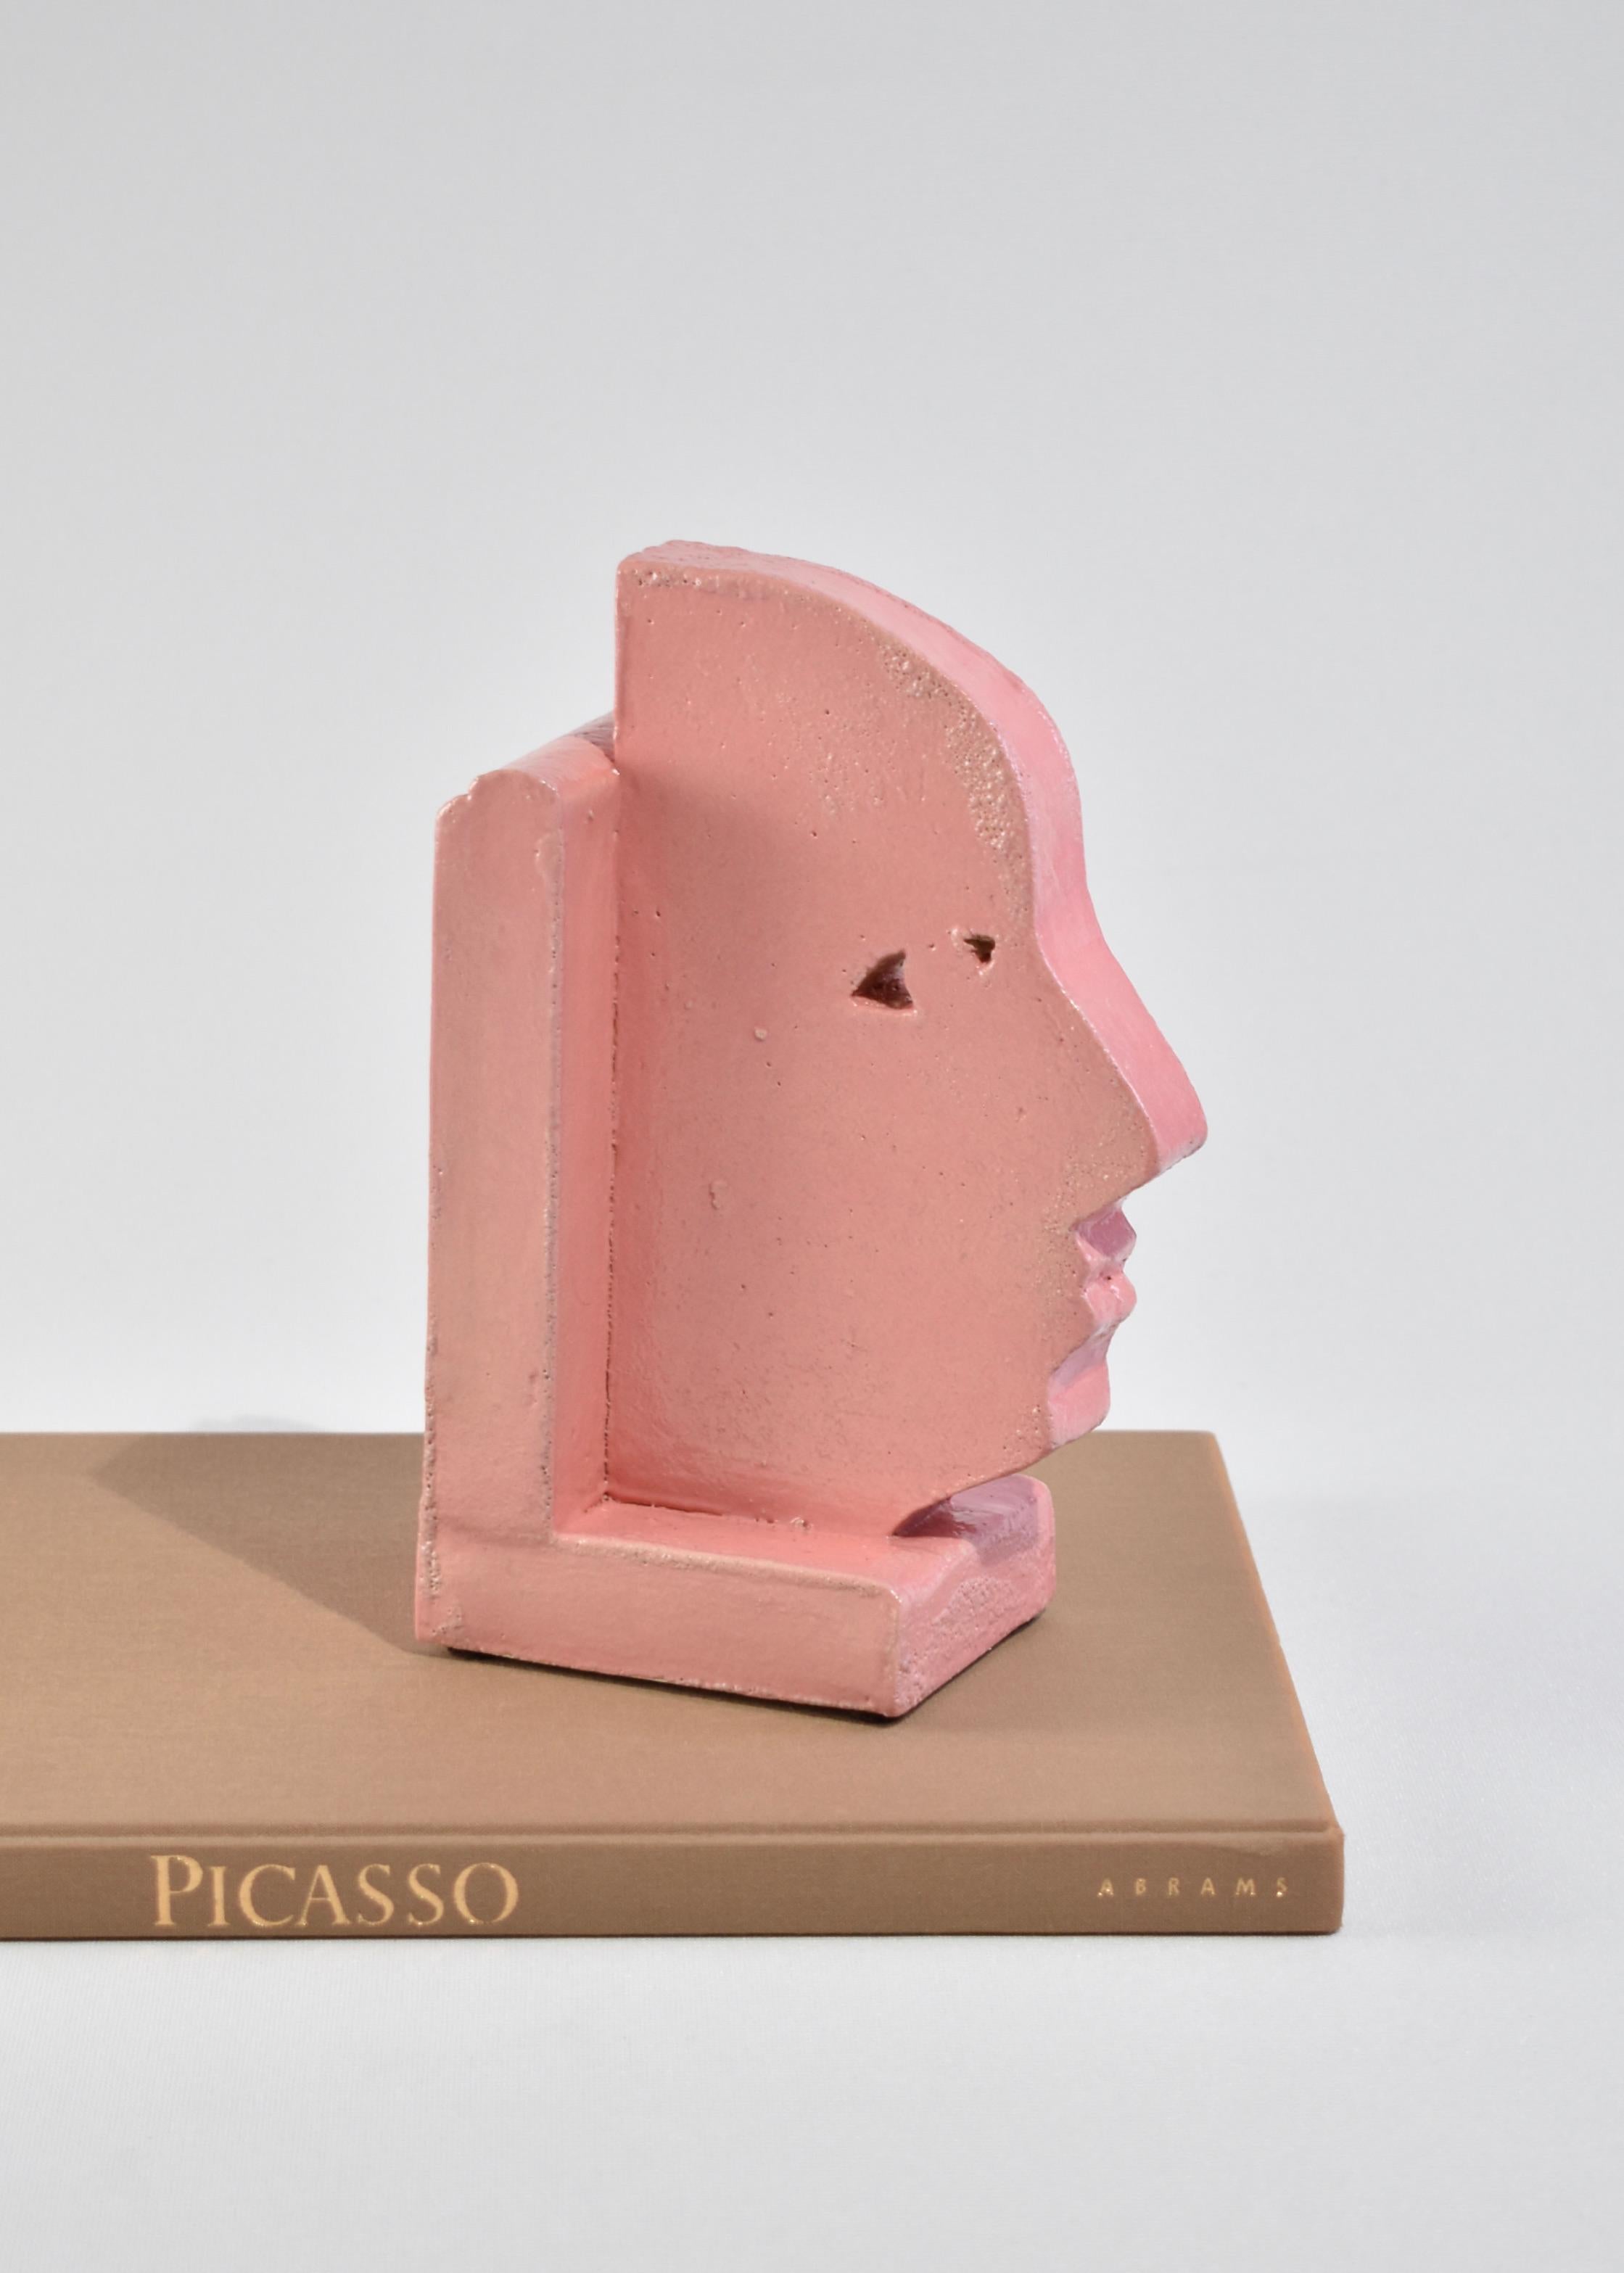 Handmade slab-built bookends with a face profile design in pink, set of two. By Shane Gabier, made in NYC.

Please note that this item is handmade and therefore unique; slight variations in color and shape are to be expected.